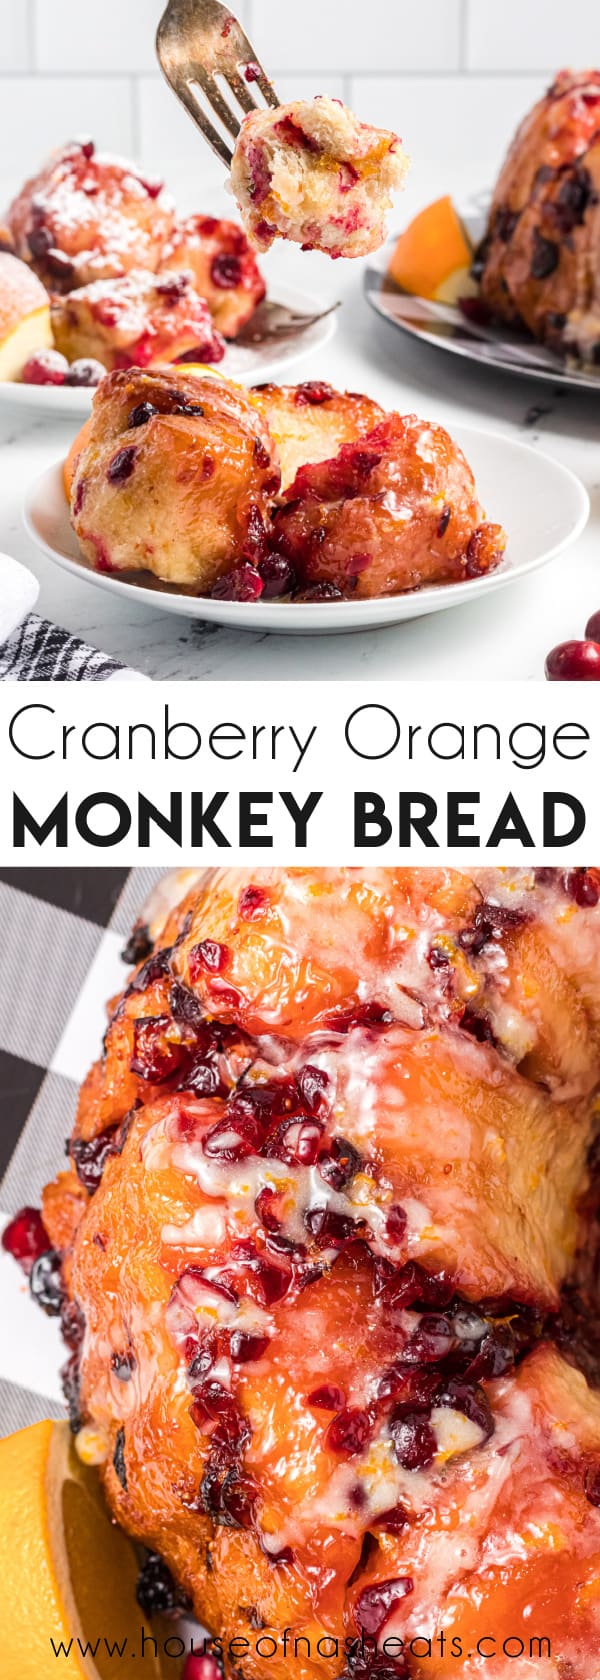 A collage of images of cranberry orange monkey bread with text overlay.